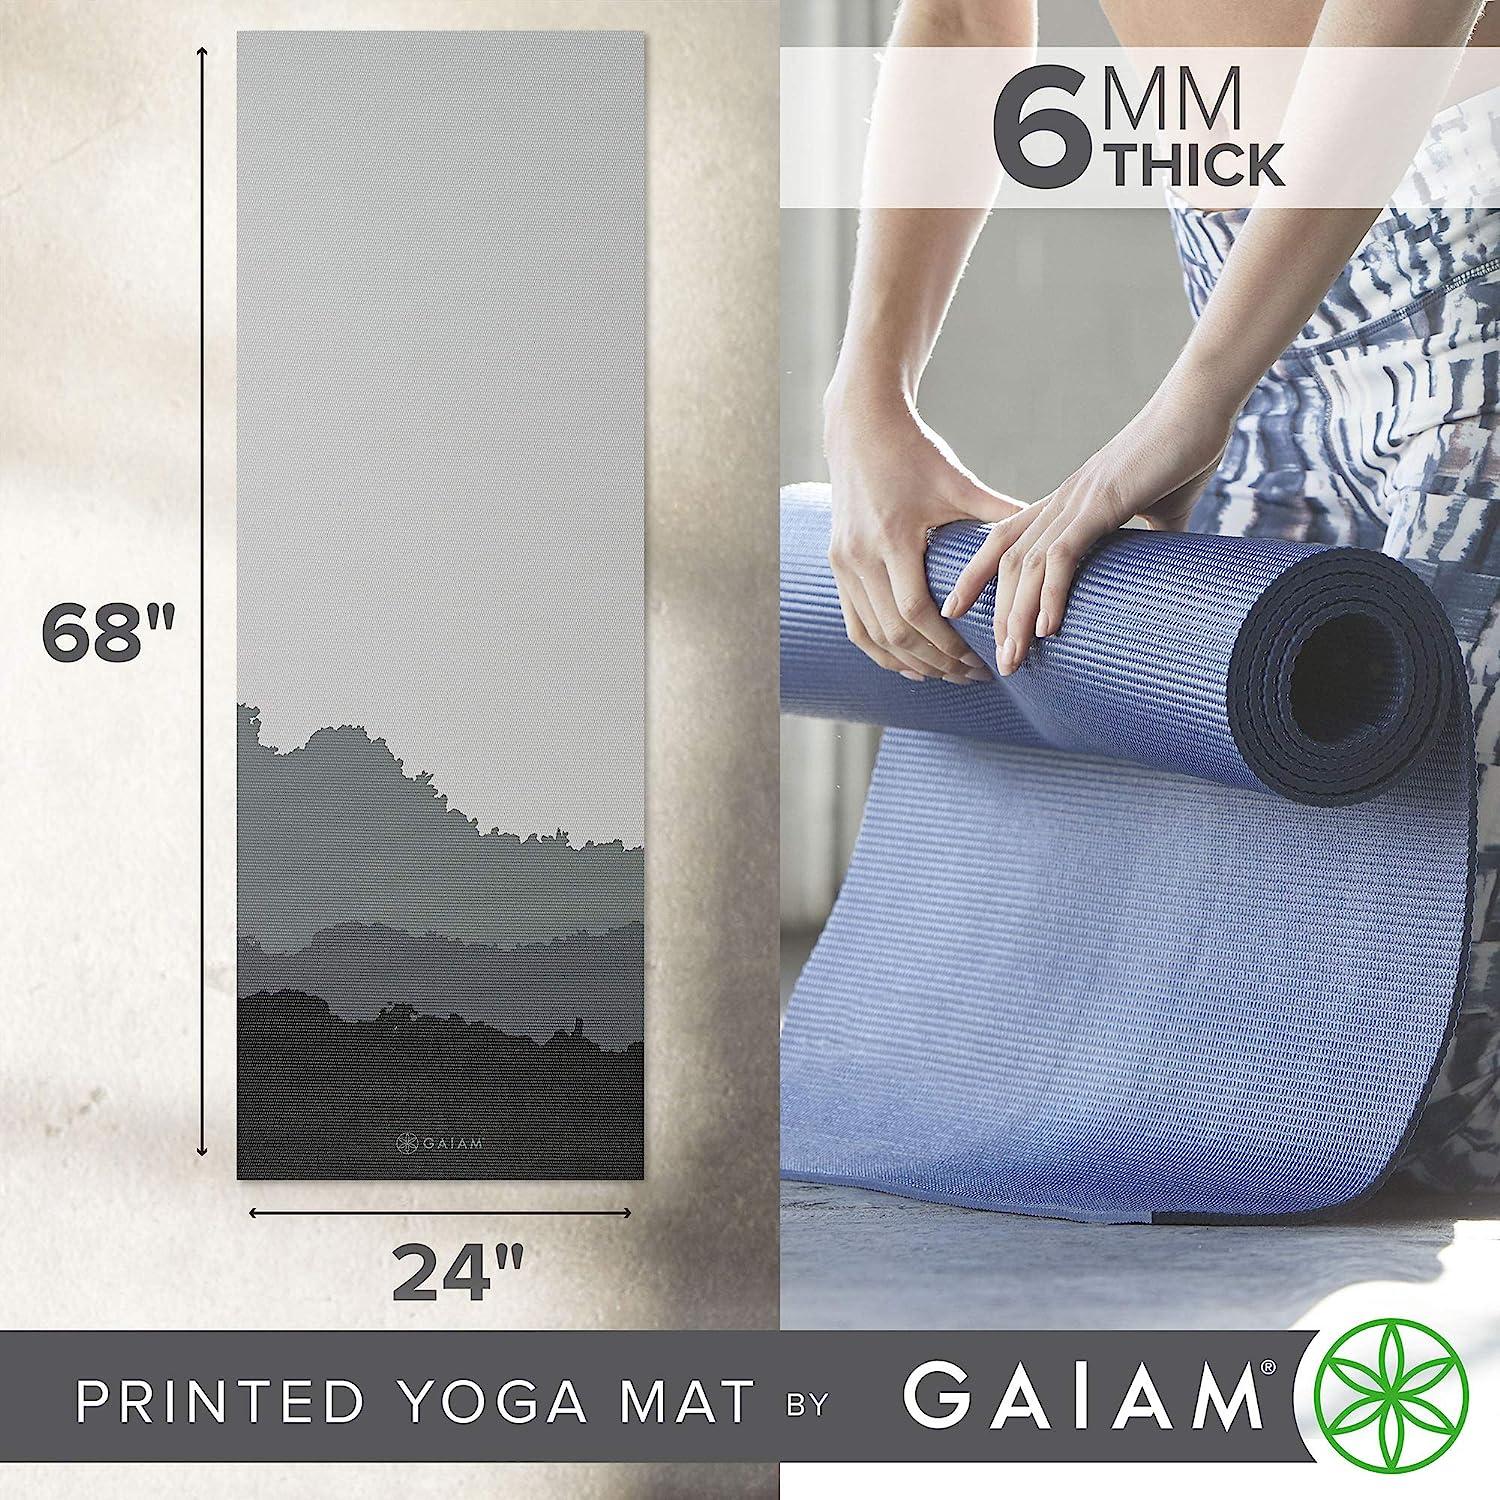 Gaiam Yoga Mat - Premium 6mm Print Extra Thick Non Slip Exercise & Fitness Mat  for All Types of Yoga, Pilates & Floor Workouts (68L x 24W x 6mm Thick) Granite  Mountains